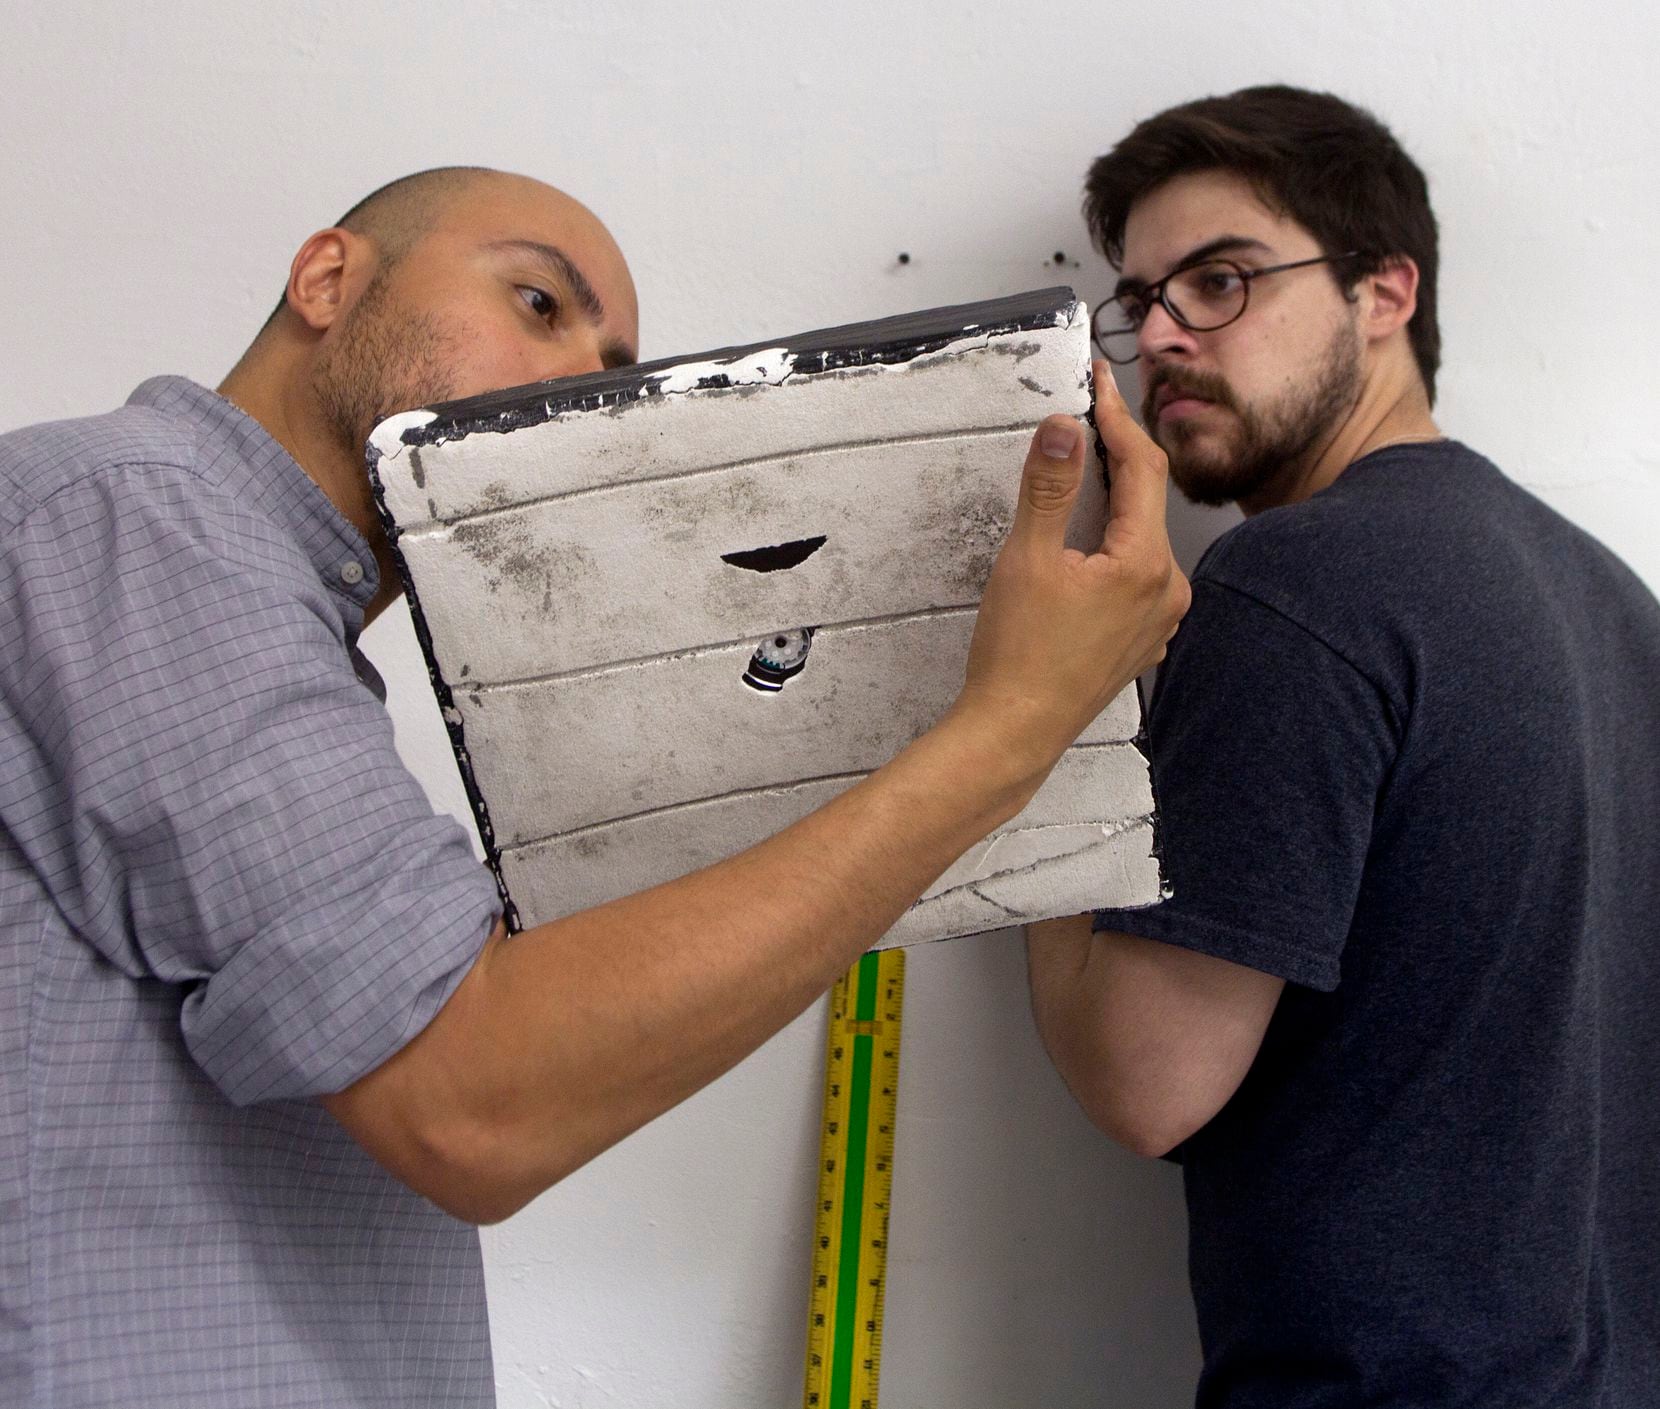 Artist Arthur Pena and gallery owner Kevin Rubén Jacobs installed a work by Pena titled "attempt 36 / everything you ever wanted" at Oliver Francis Gallery in June 2012.